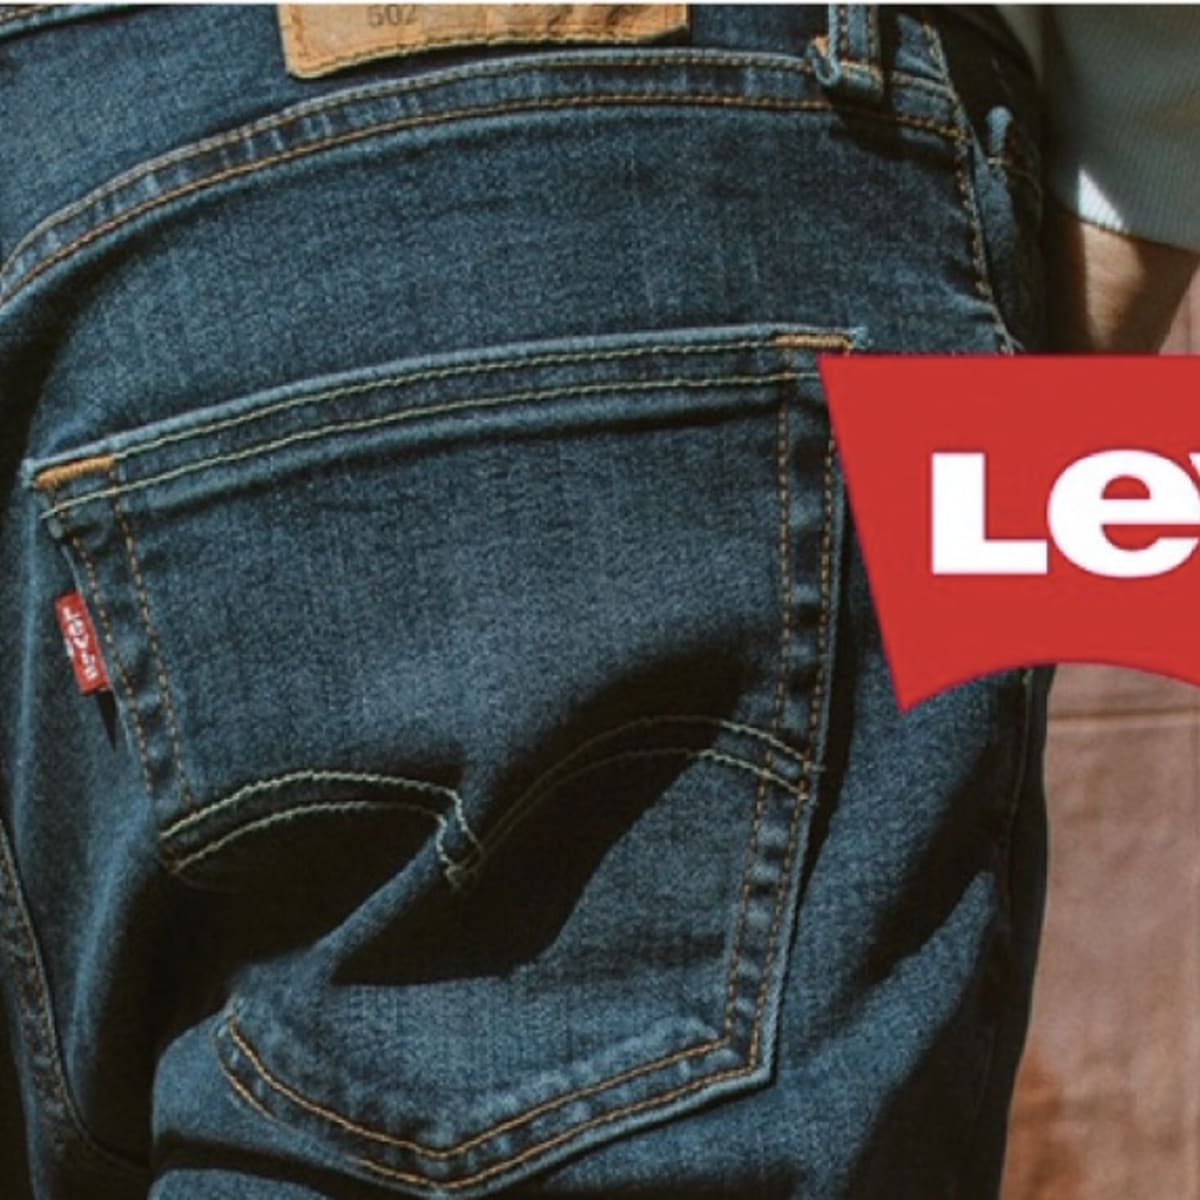 Target to start selling Levi's famous 'Red Tab' jeans - Bring Me The News